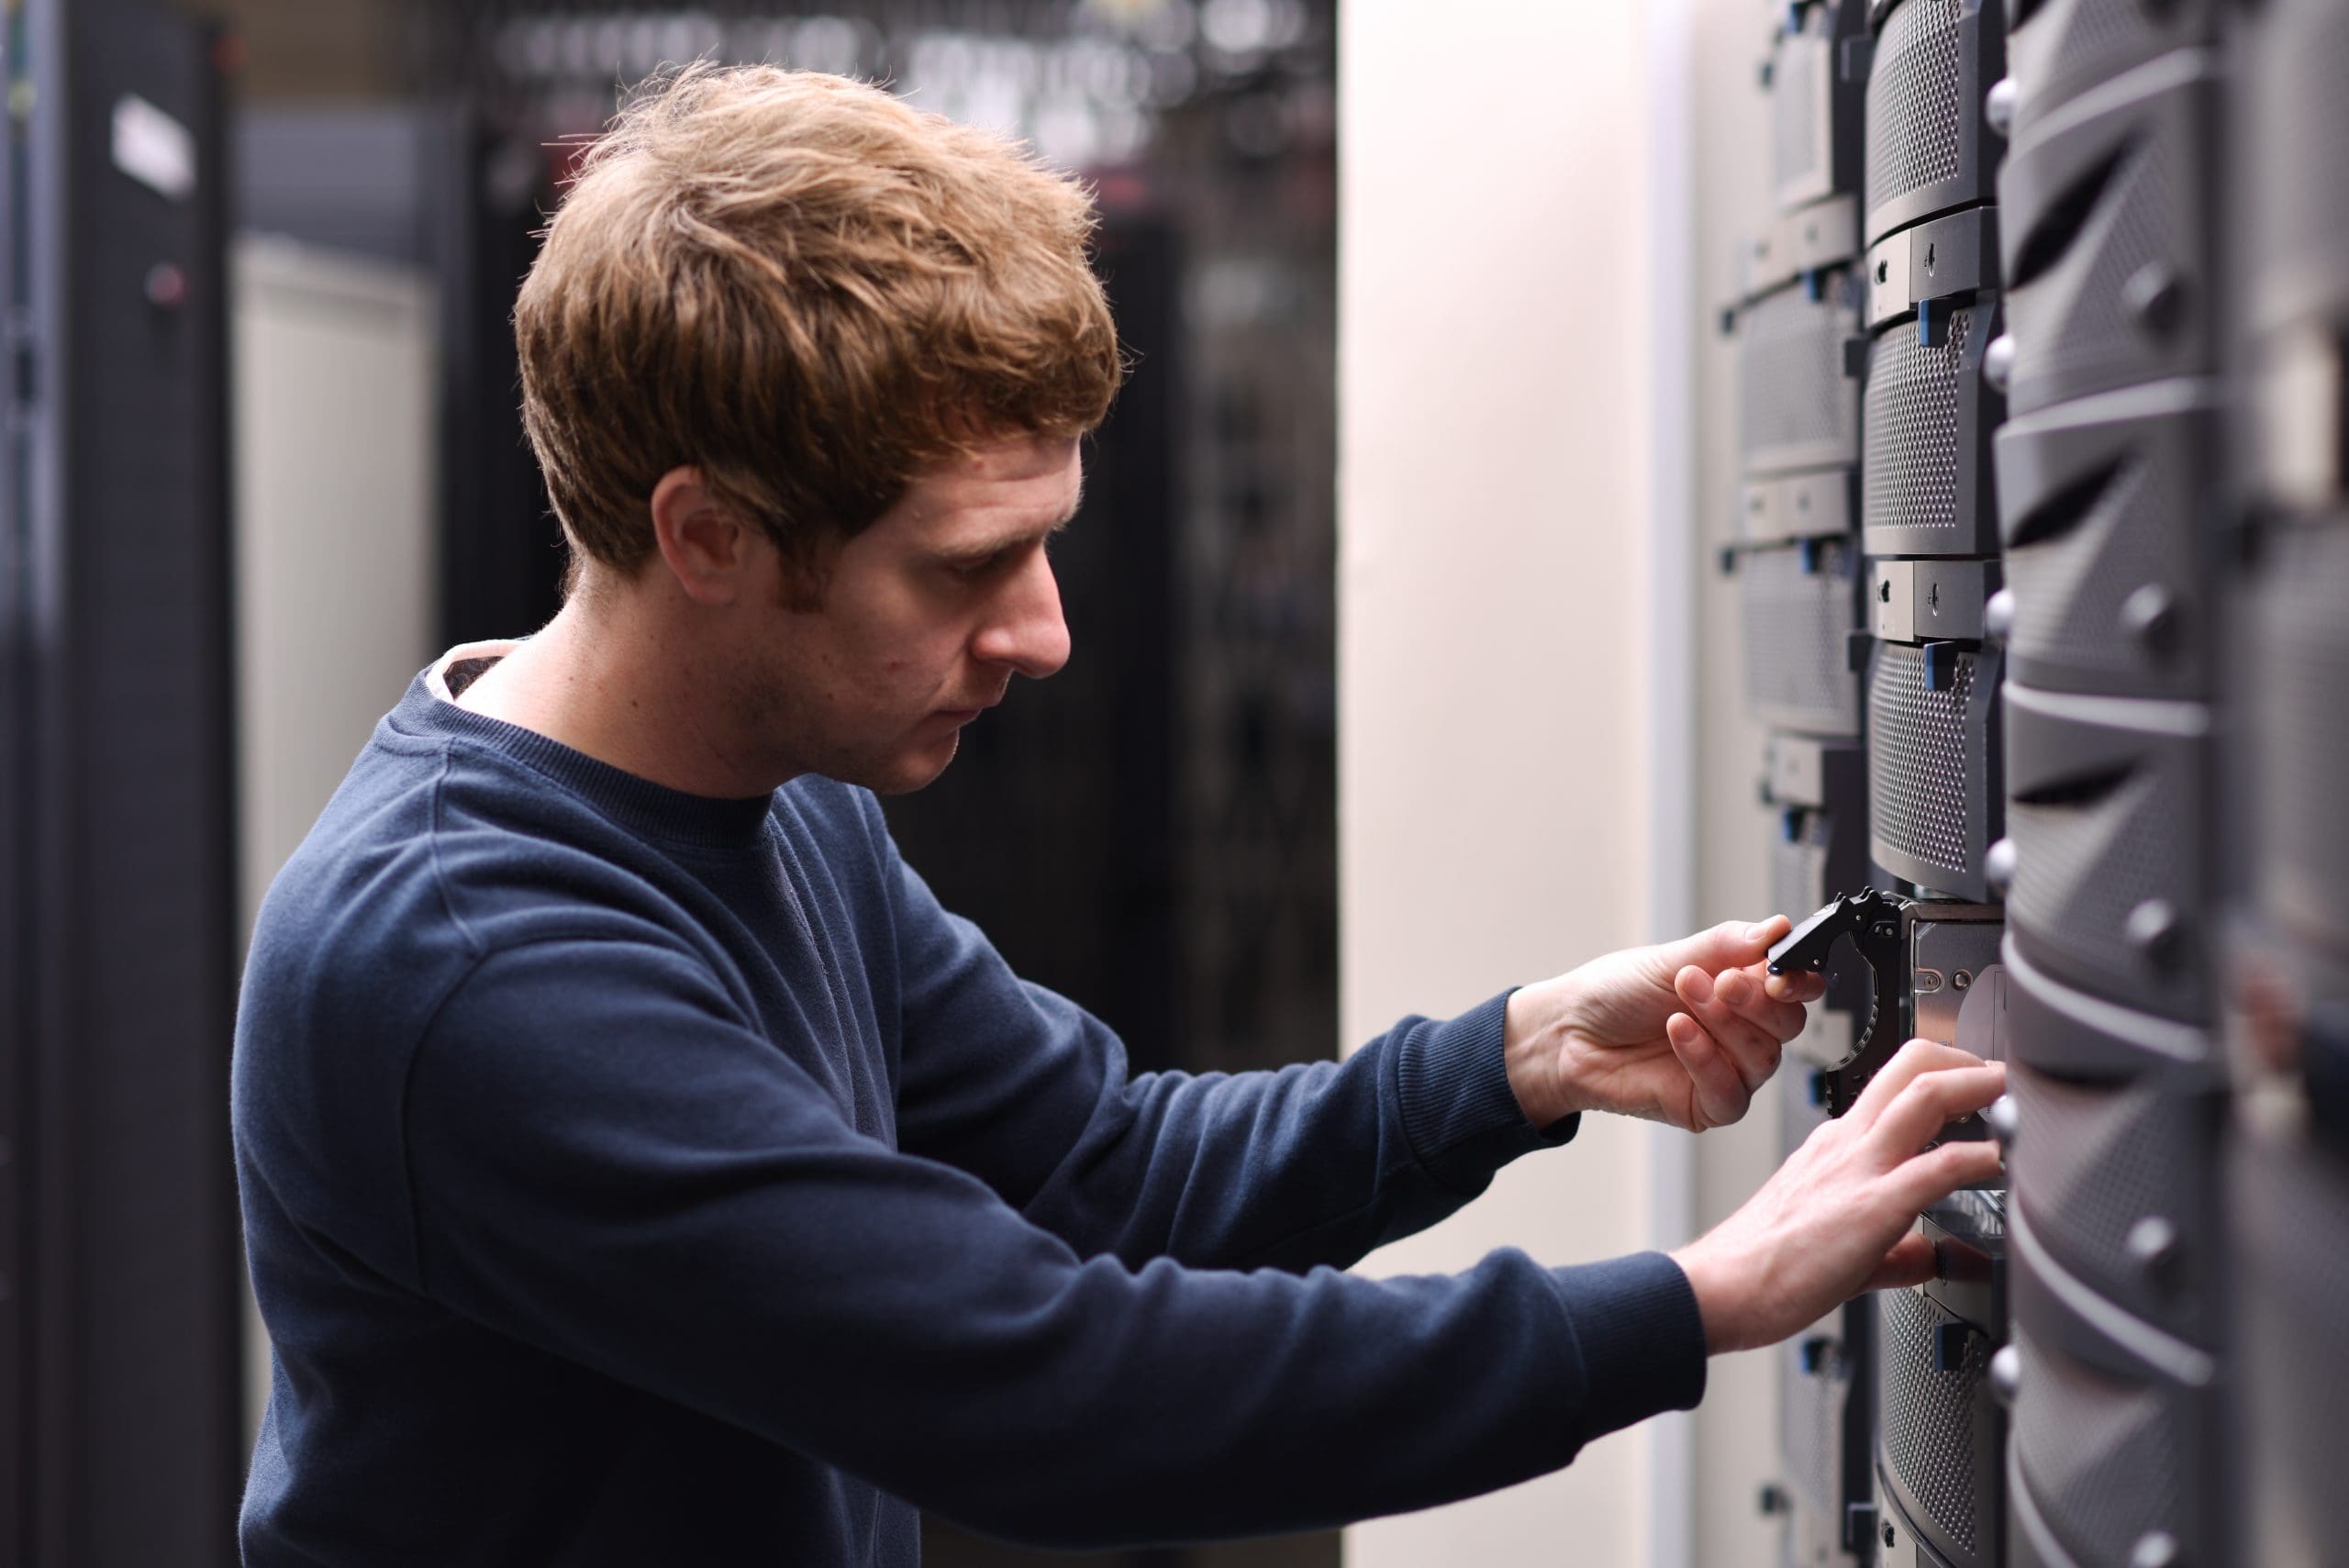 Cantium employee removing storage from a server in the cloud data centre